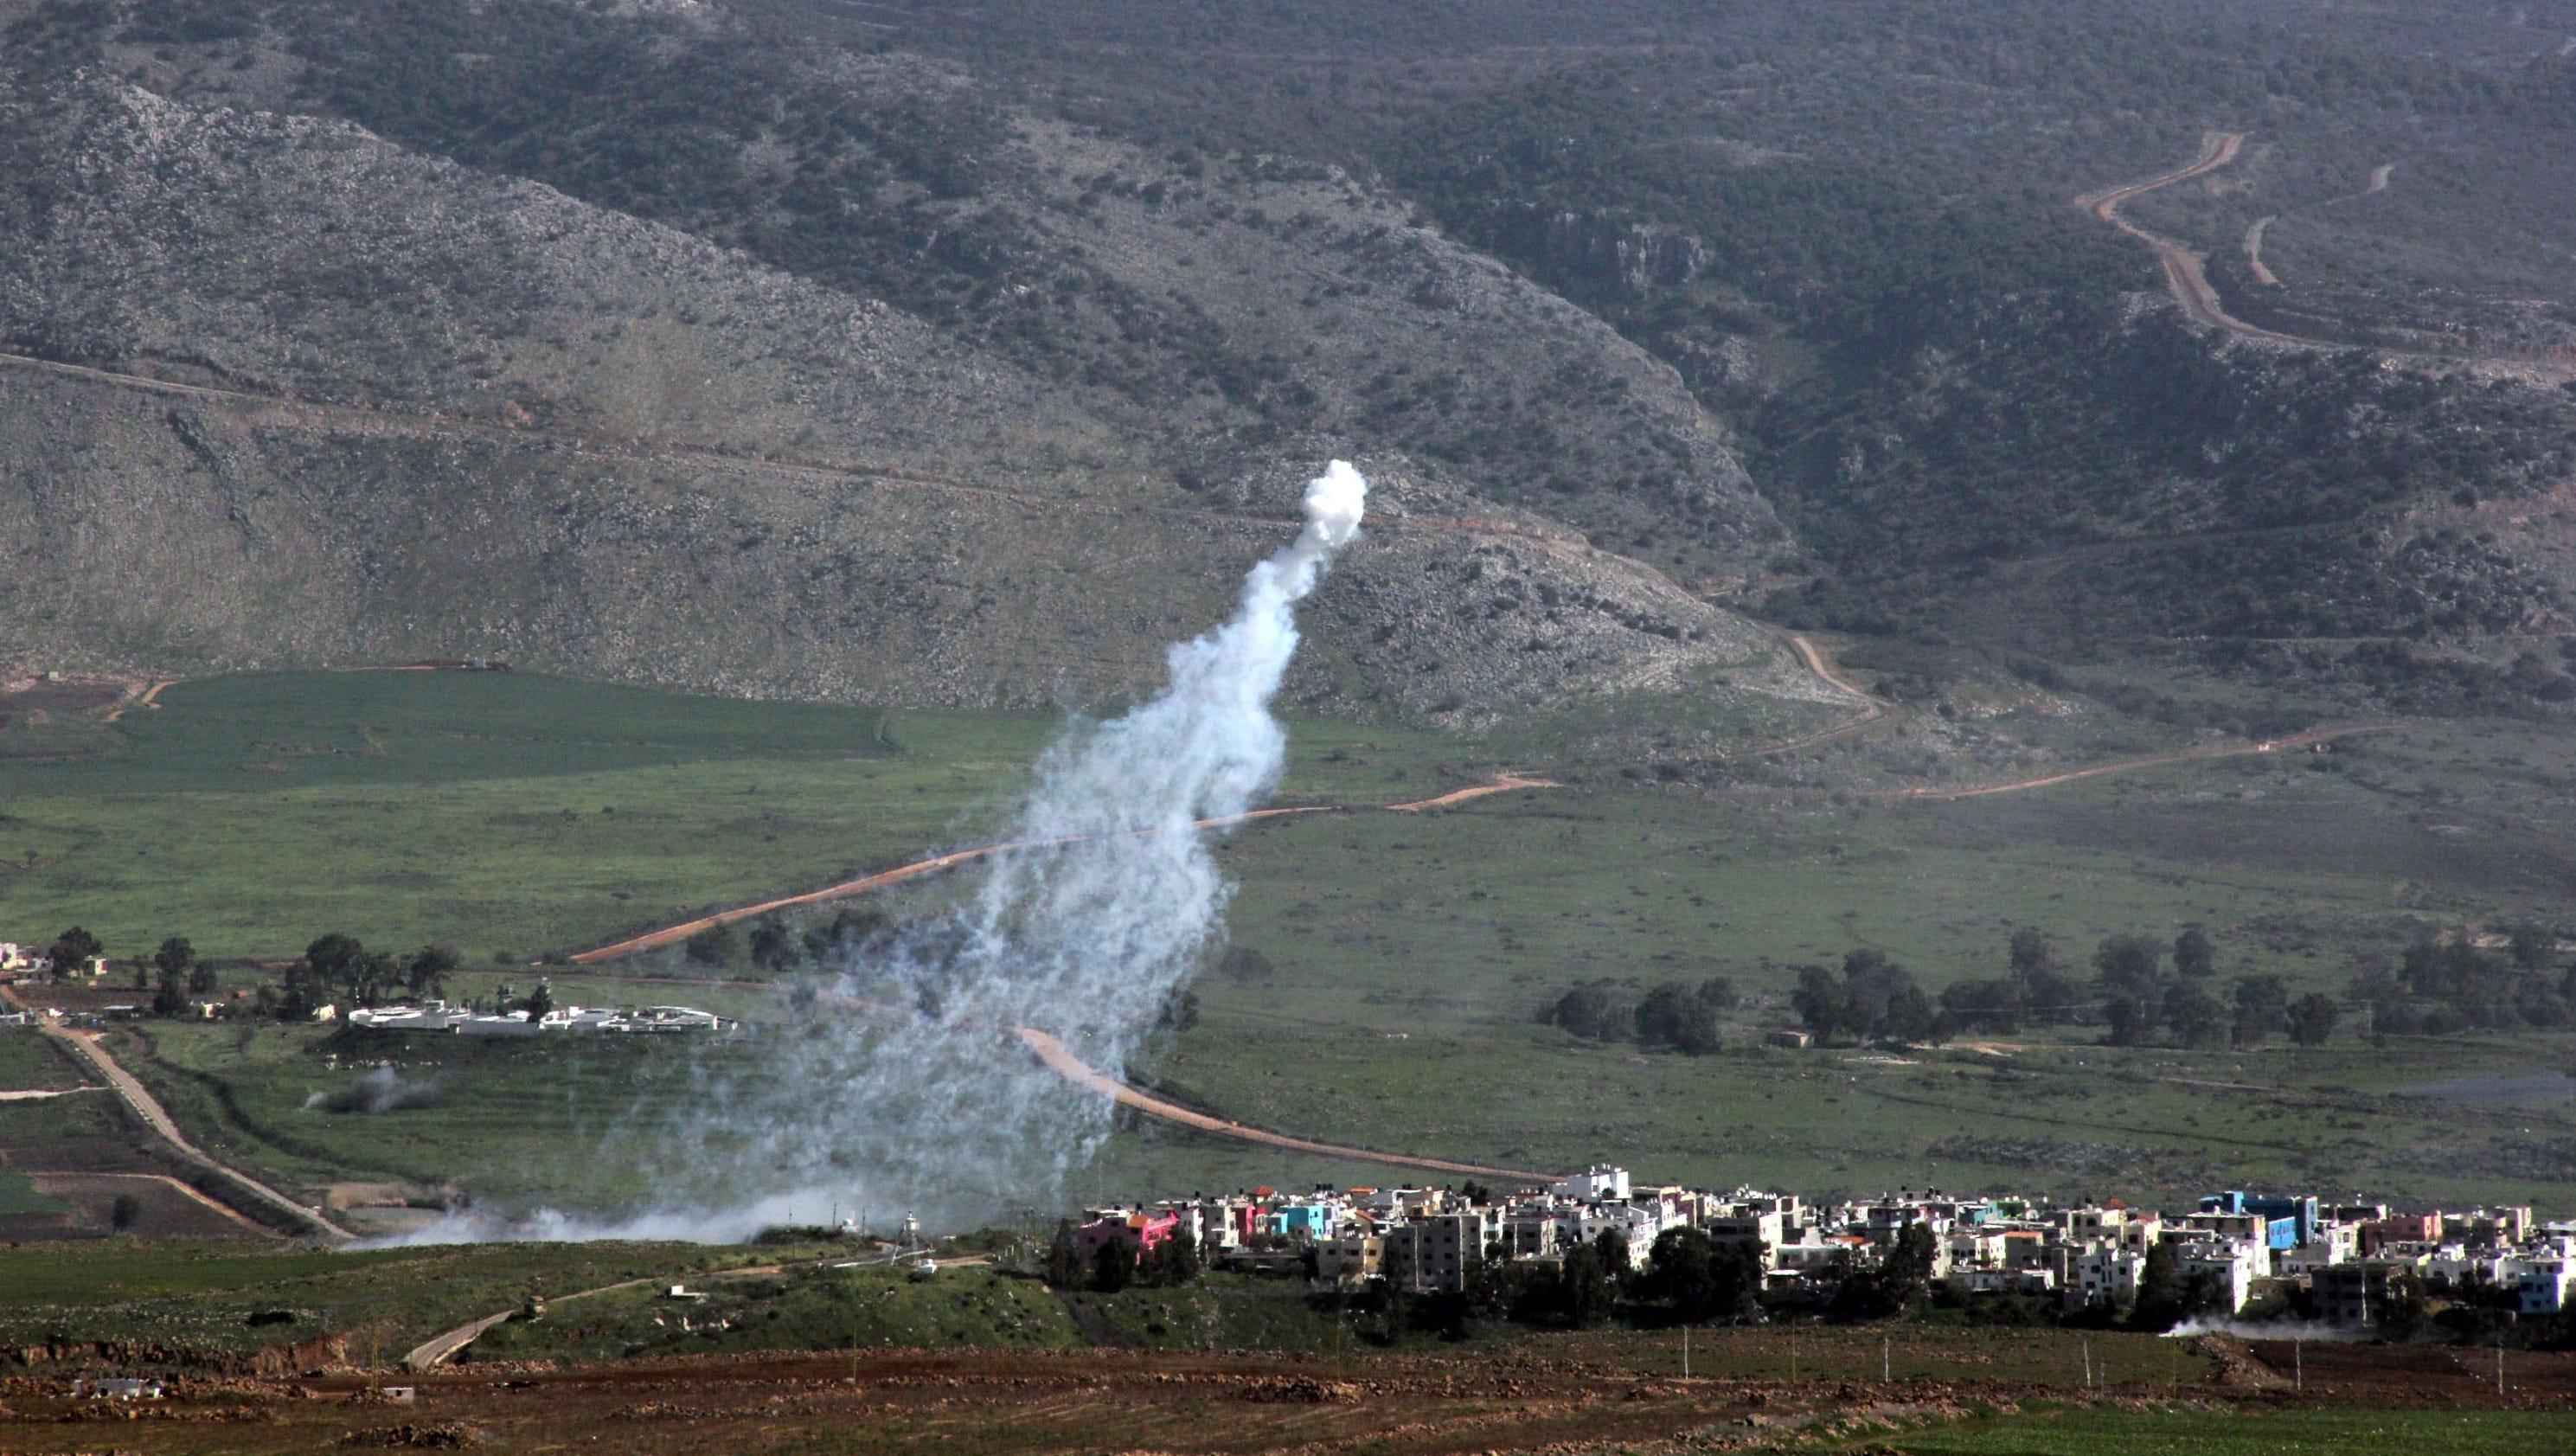 Hezbollah attacks posts and equipment along border with Israel